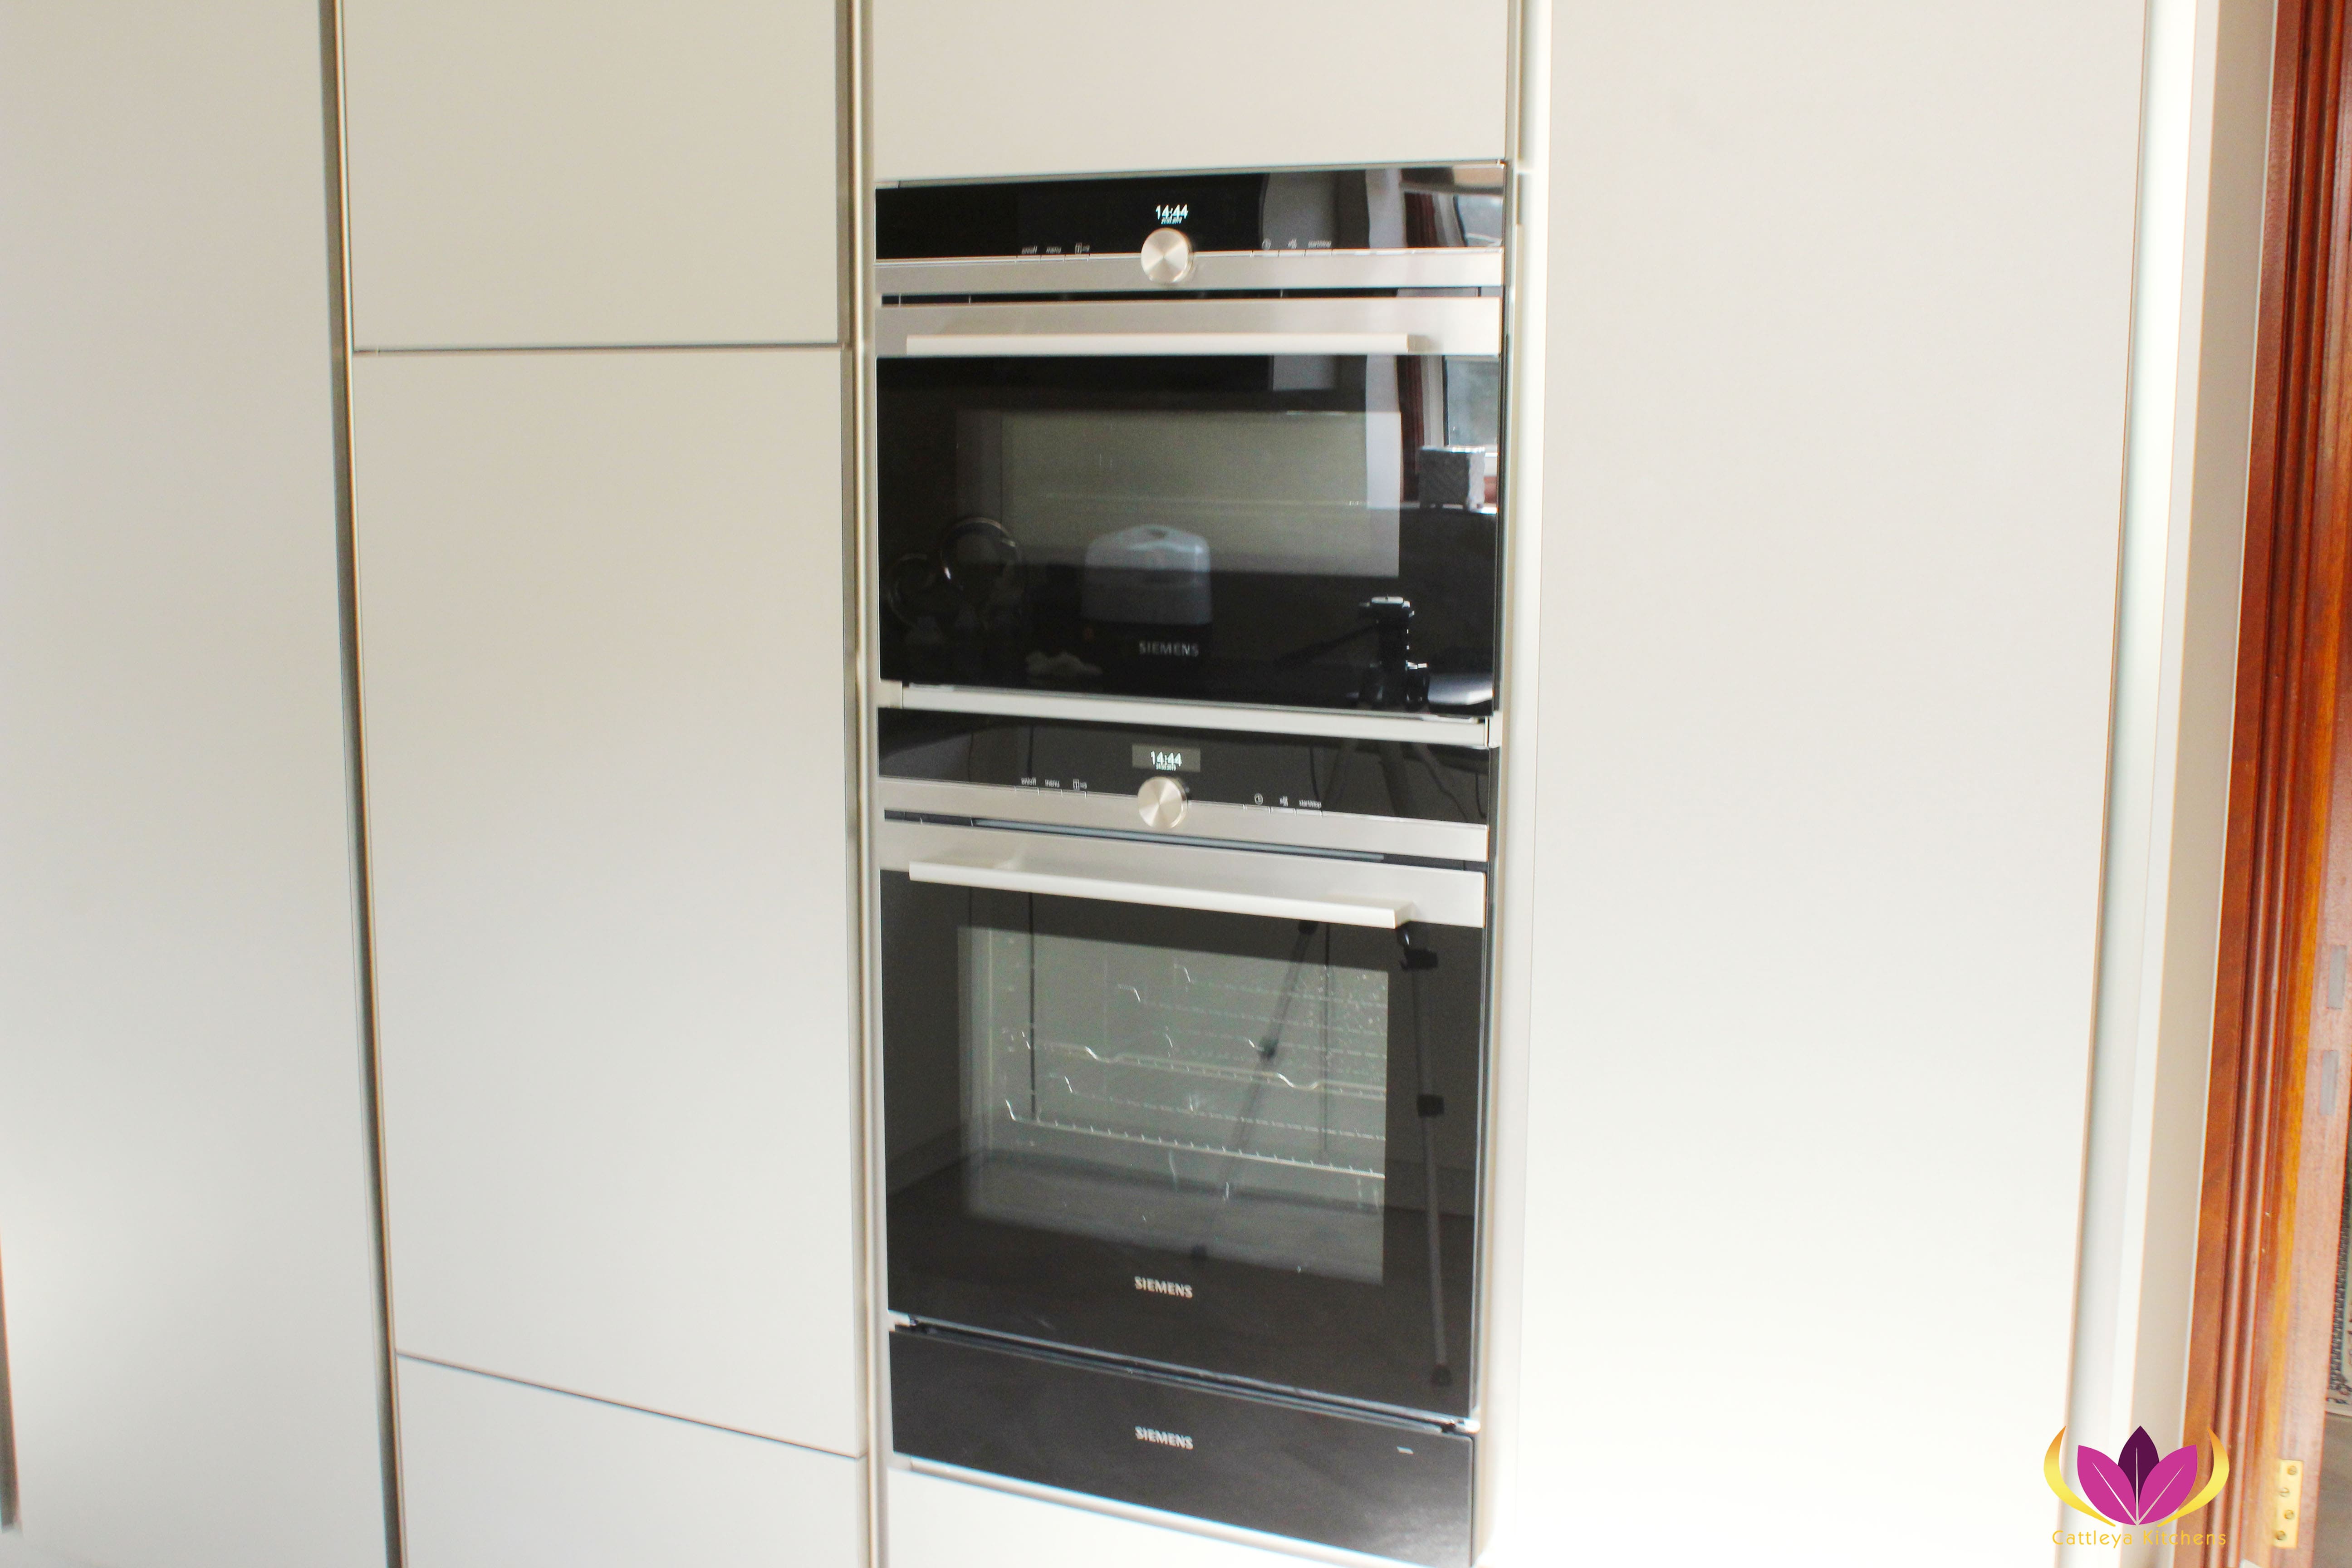 Siemens Oven Ealing Finished Kitchen Project